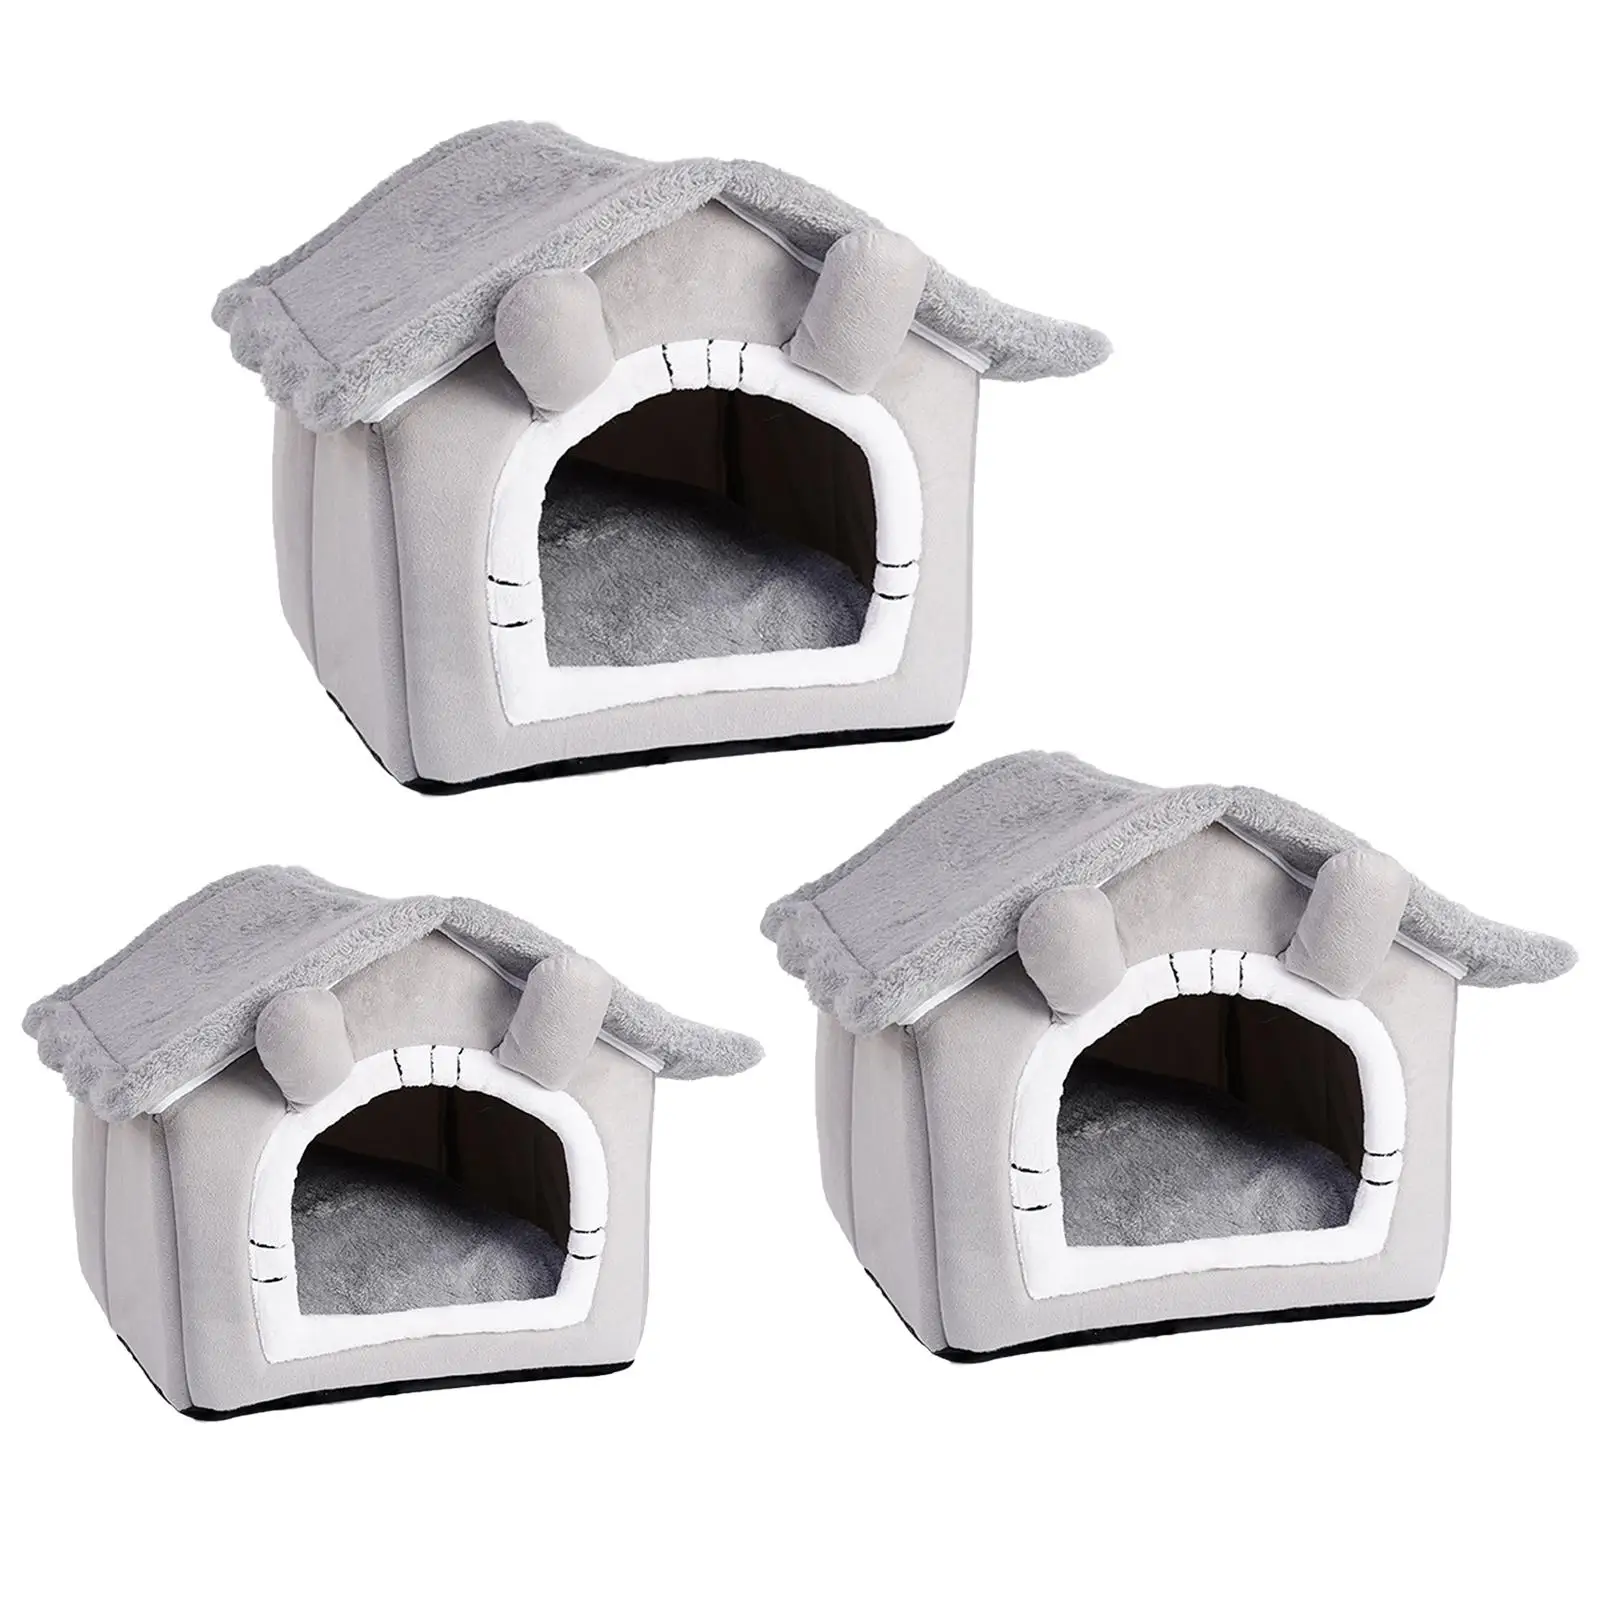 Foldable Dog House for Small Medium Large Dogs Cats Dog Villa Pets Supplies